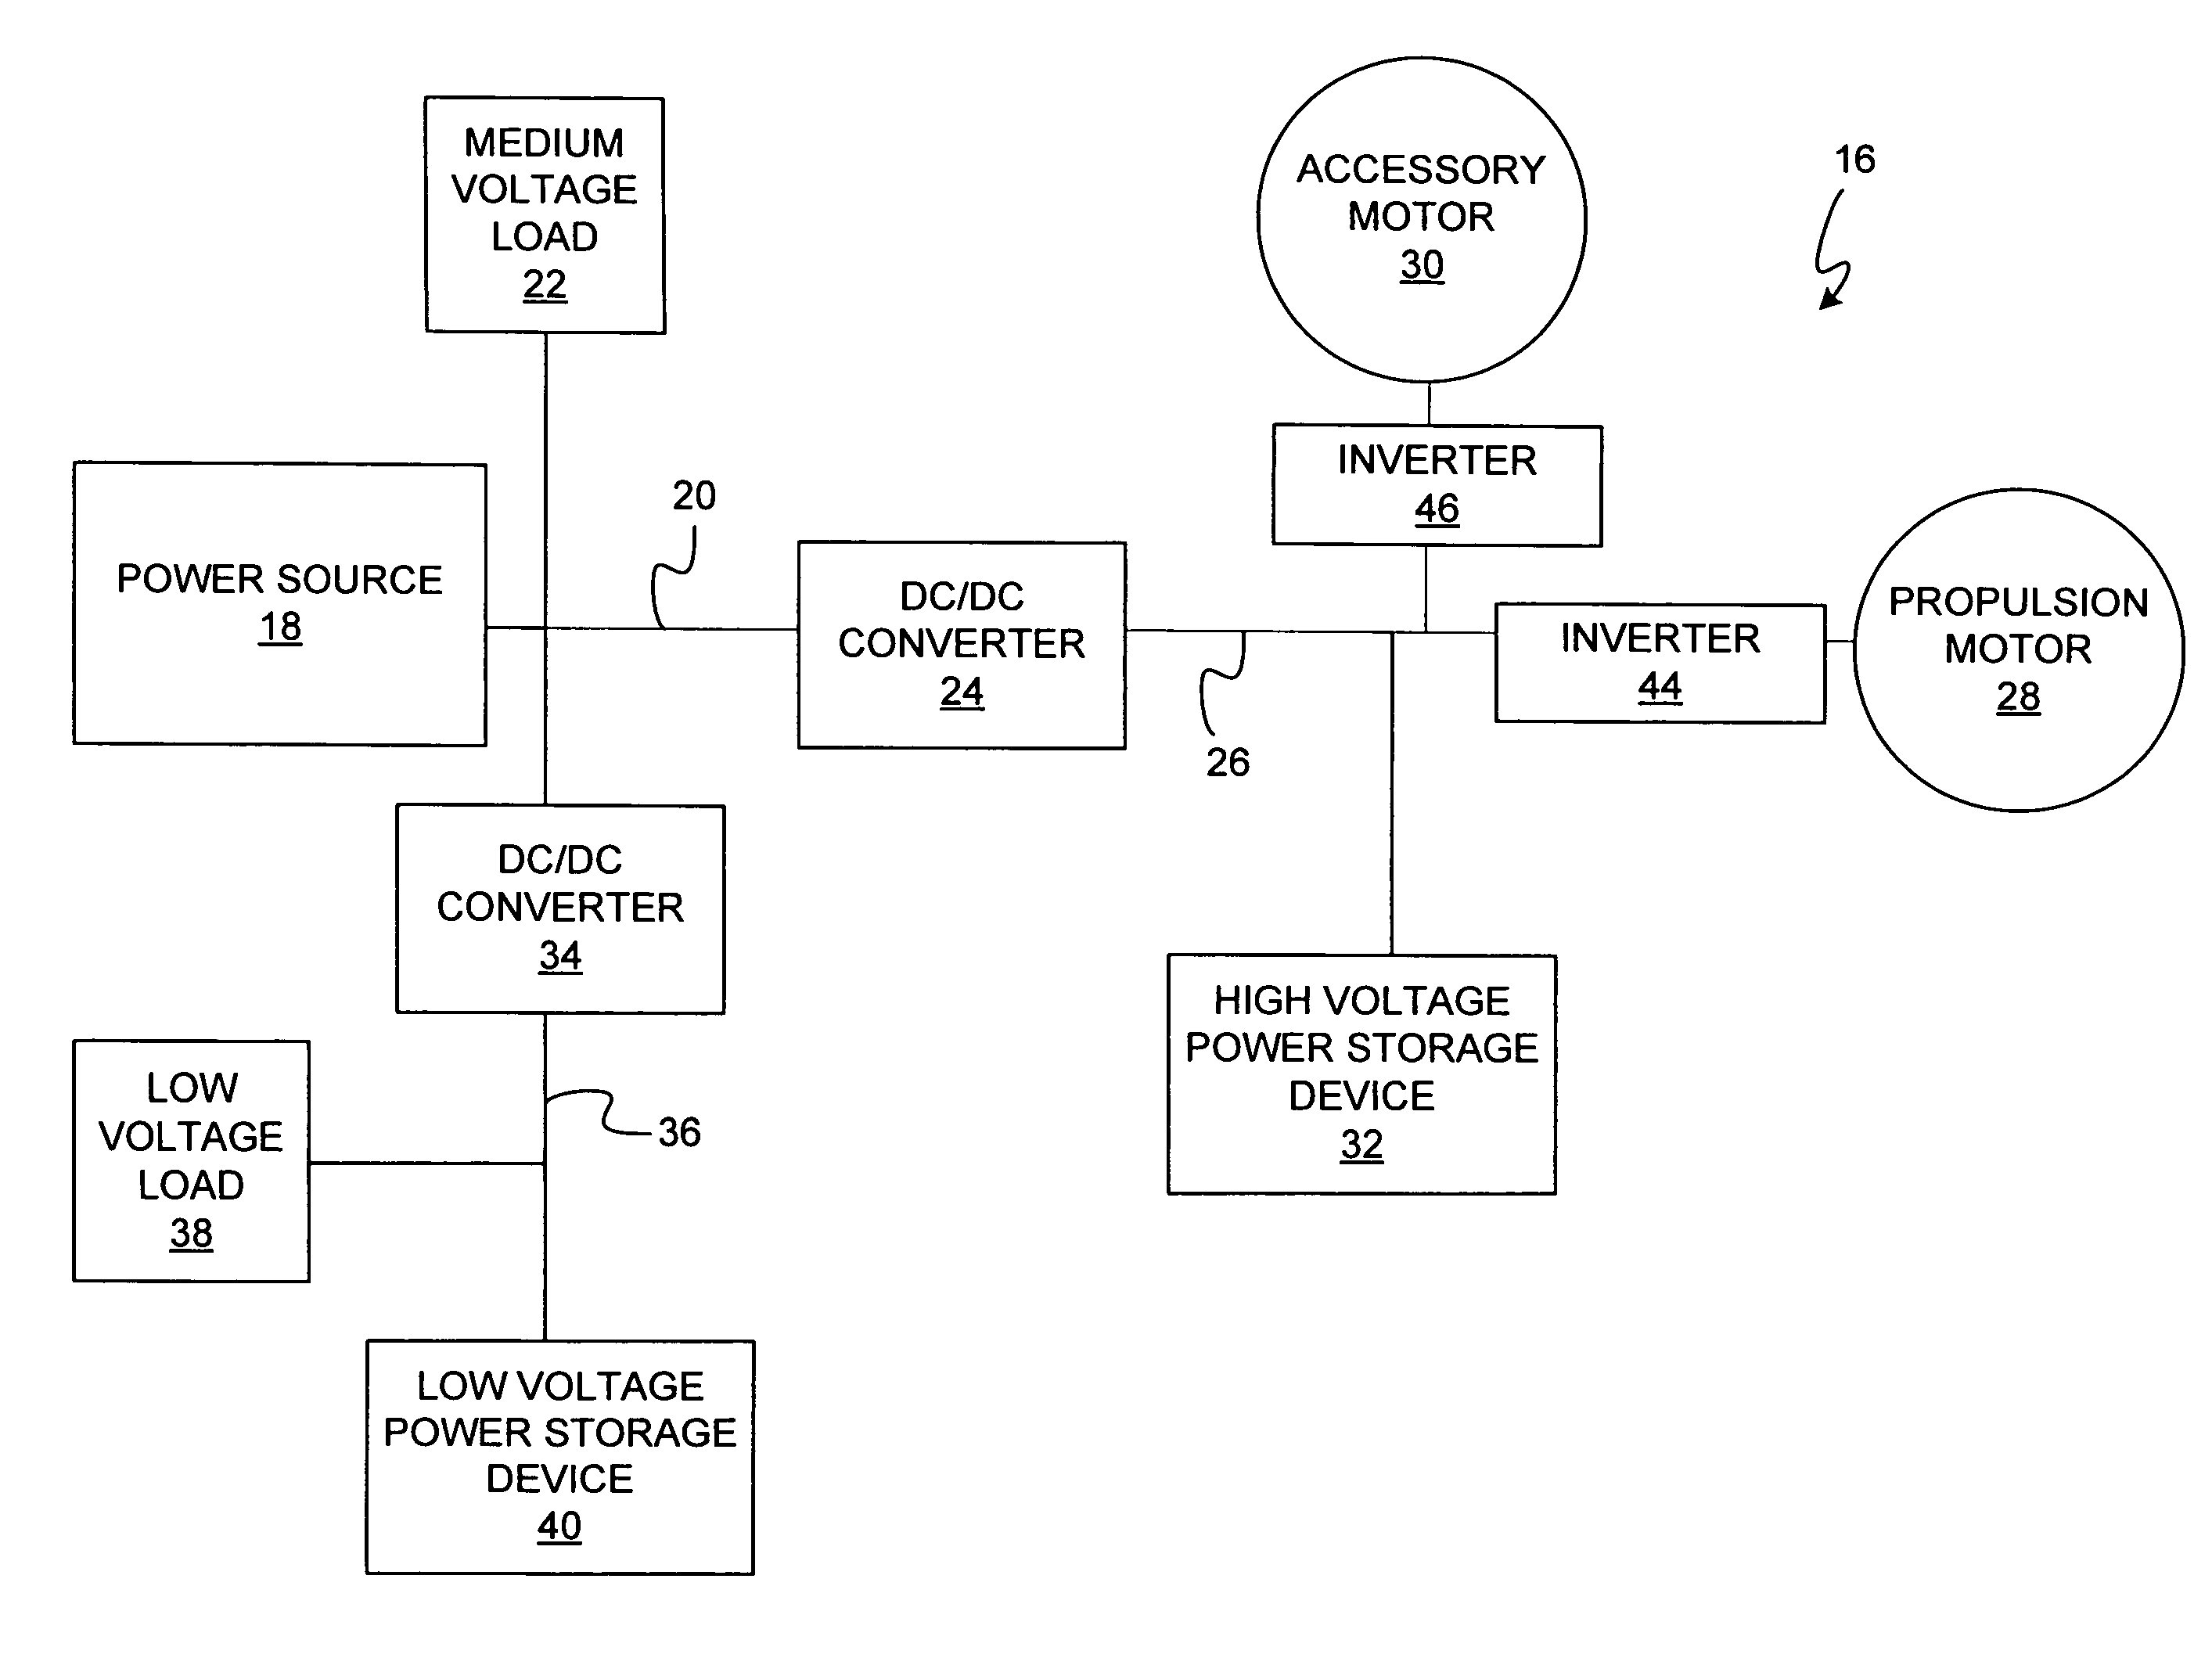 Electrical system architecture having high voltage bus